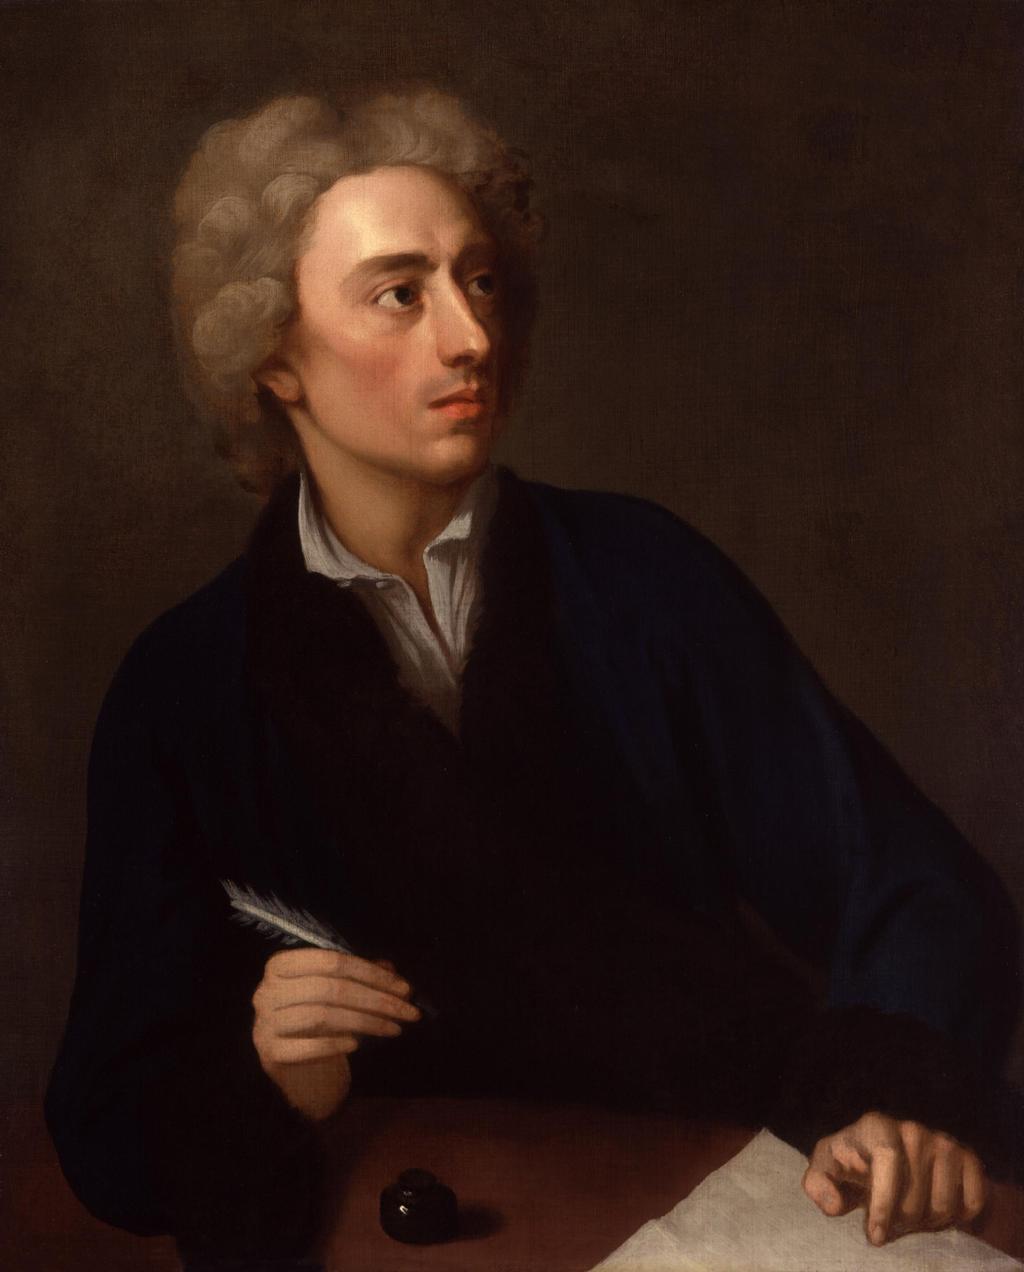 1688 1744 ALEXANDER POPE He is the second-most frequently quoted writer in The Oxford Dictionary of Quotations after Shakespeare. Pope's most famous poem is The Rape of the Lock.